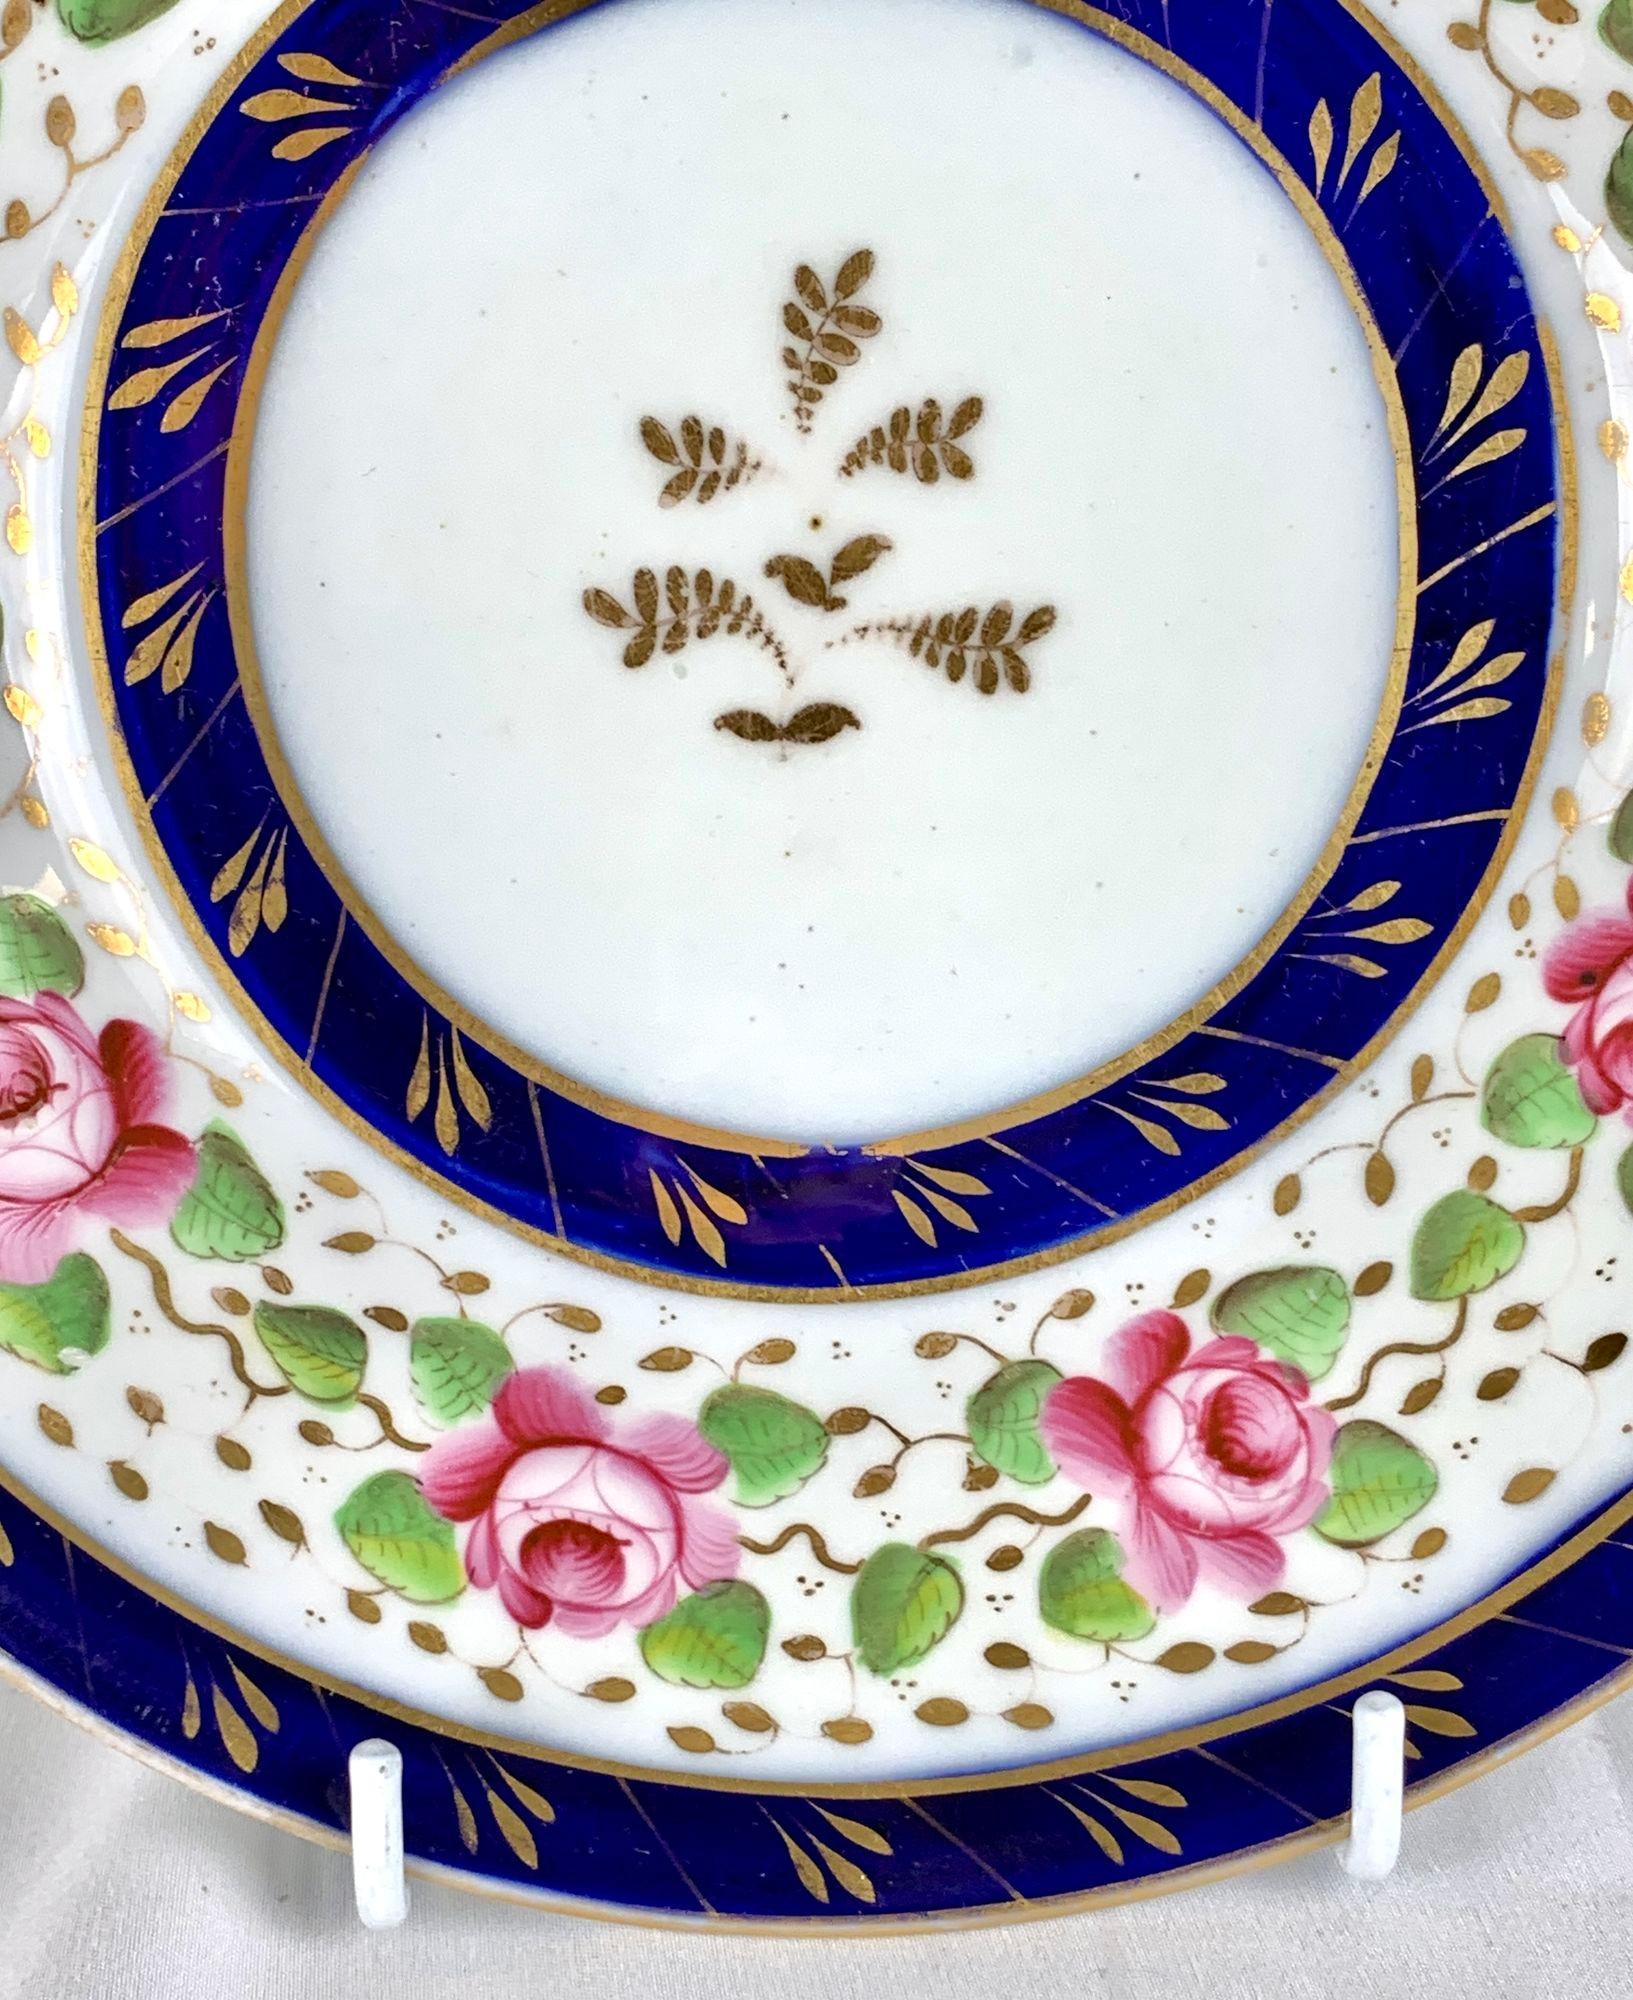 English Pink Roses Hand Painted on Antique Porcelain Dish England Circa 1810 by New Hall For Sale